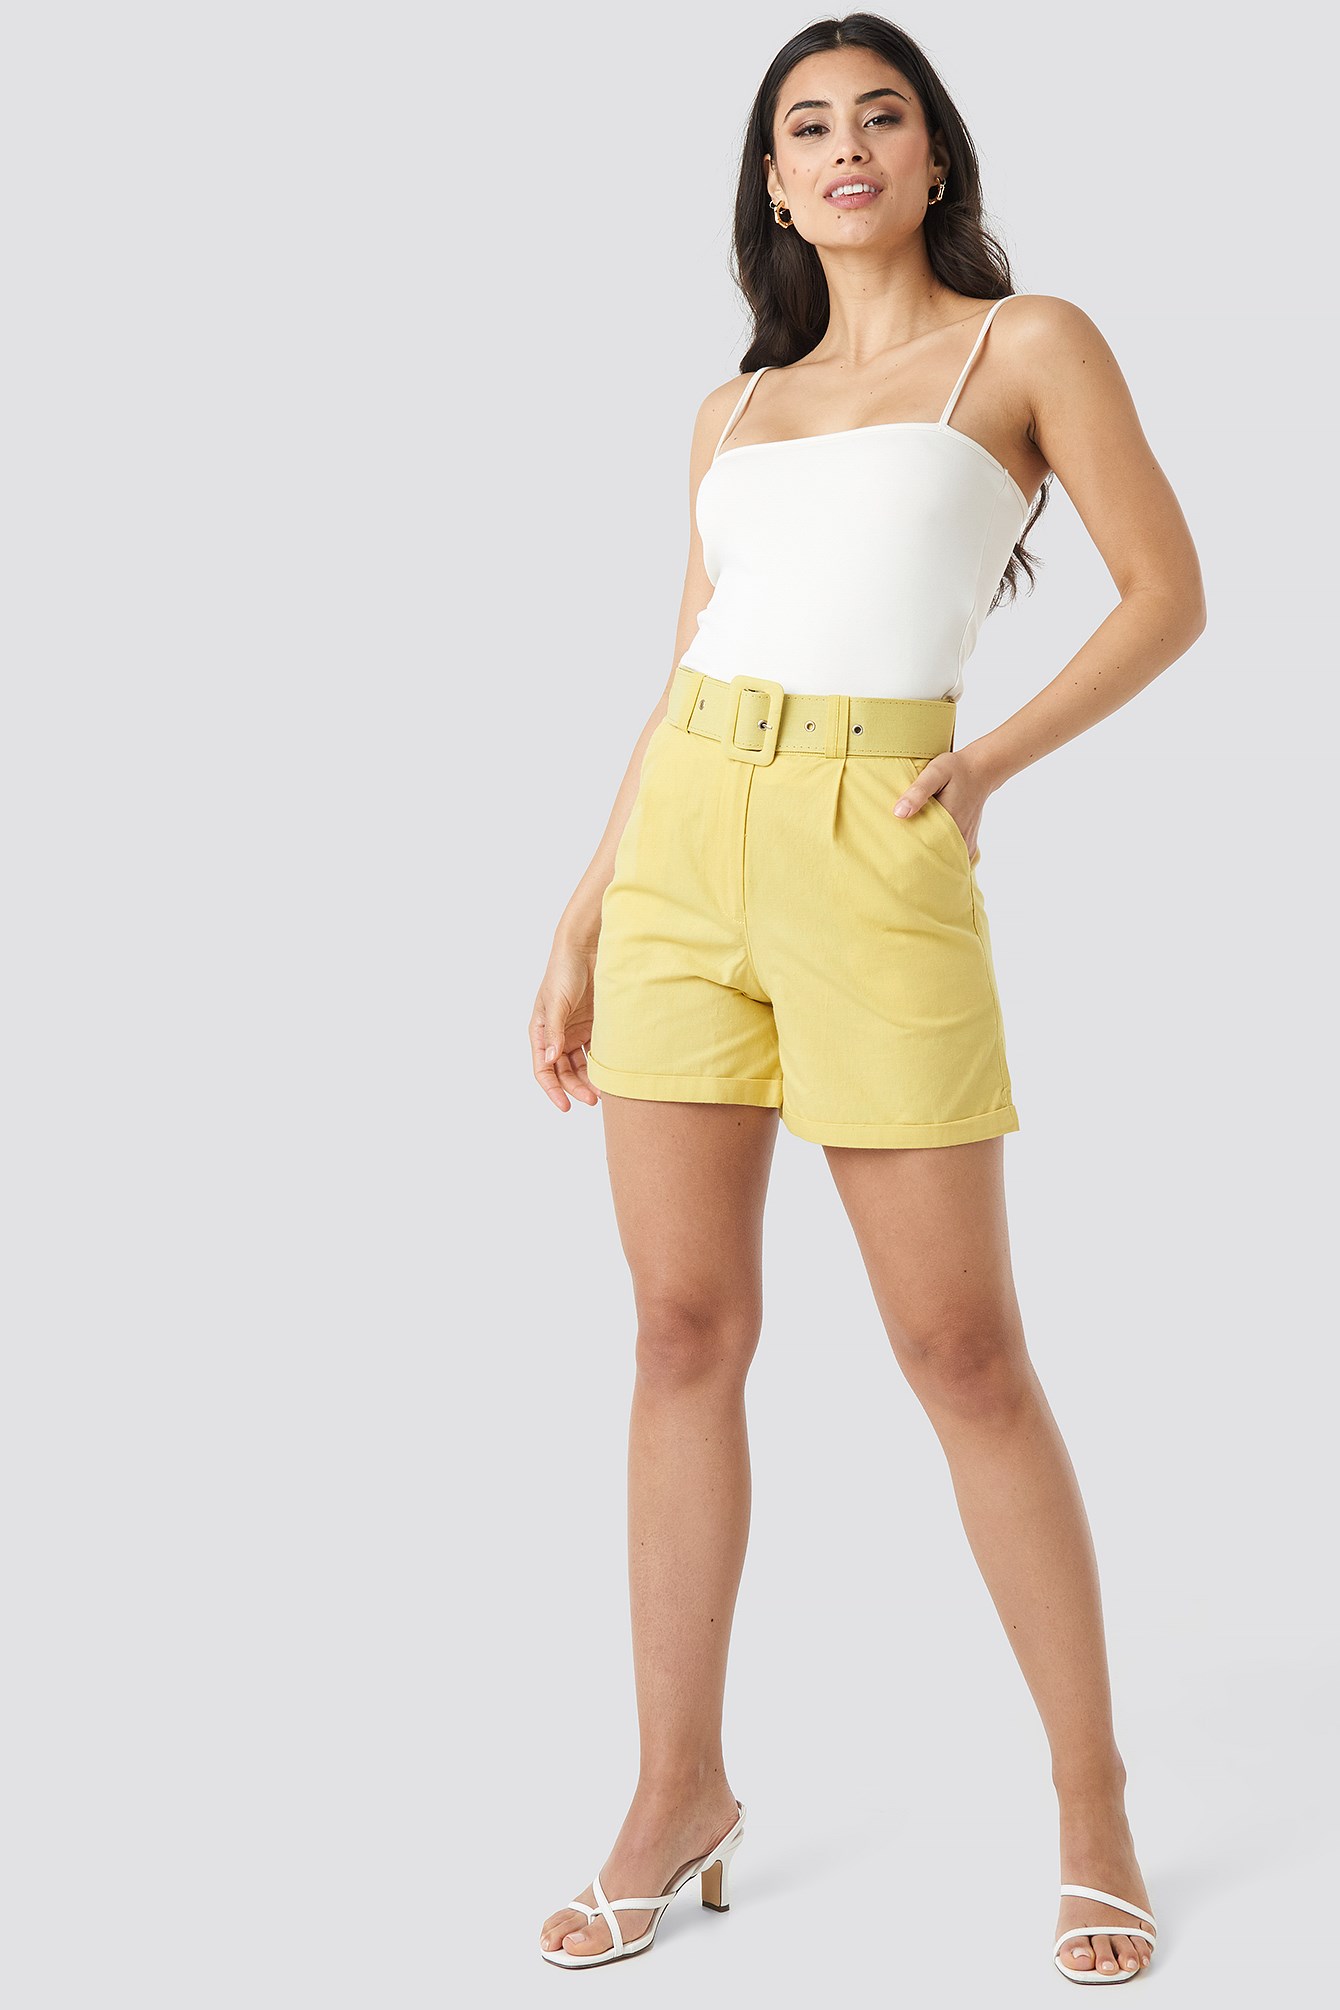 Yol Belt Detailed Shorts Outfit.